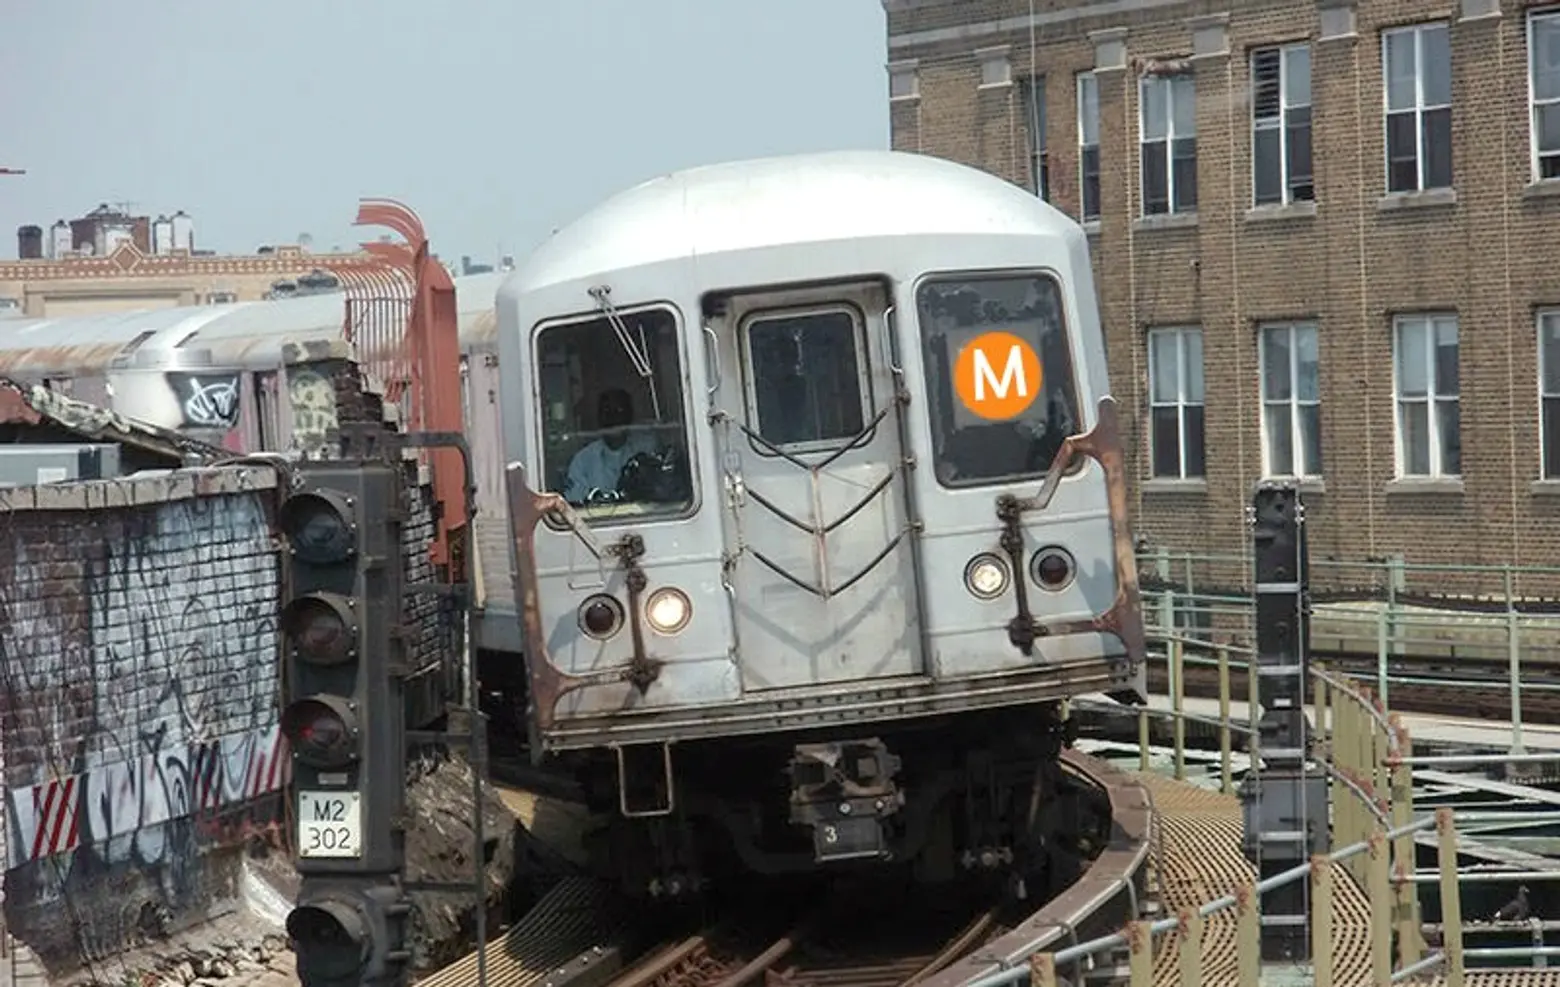 26 Bushwick Homes to Be Vacated During M Train Work; Can You Legally Take Selfies While Voting?